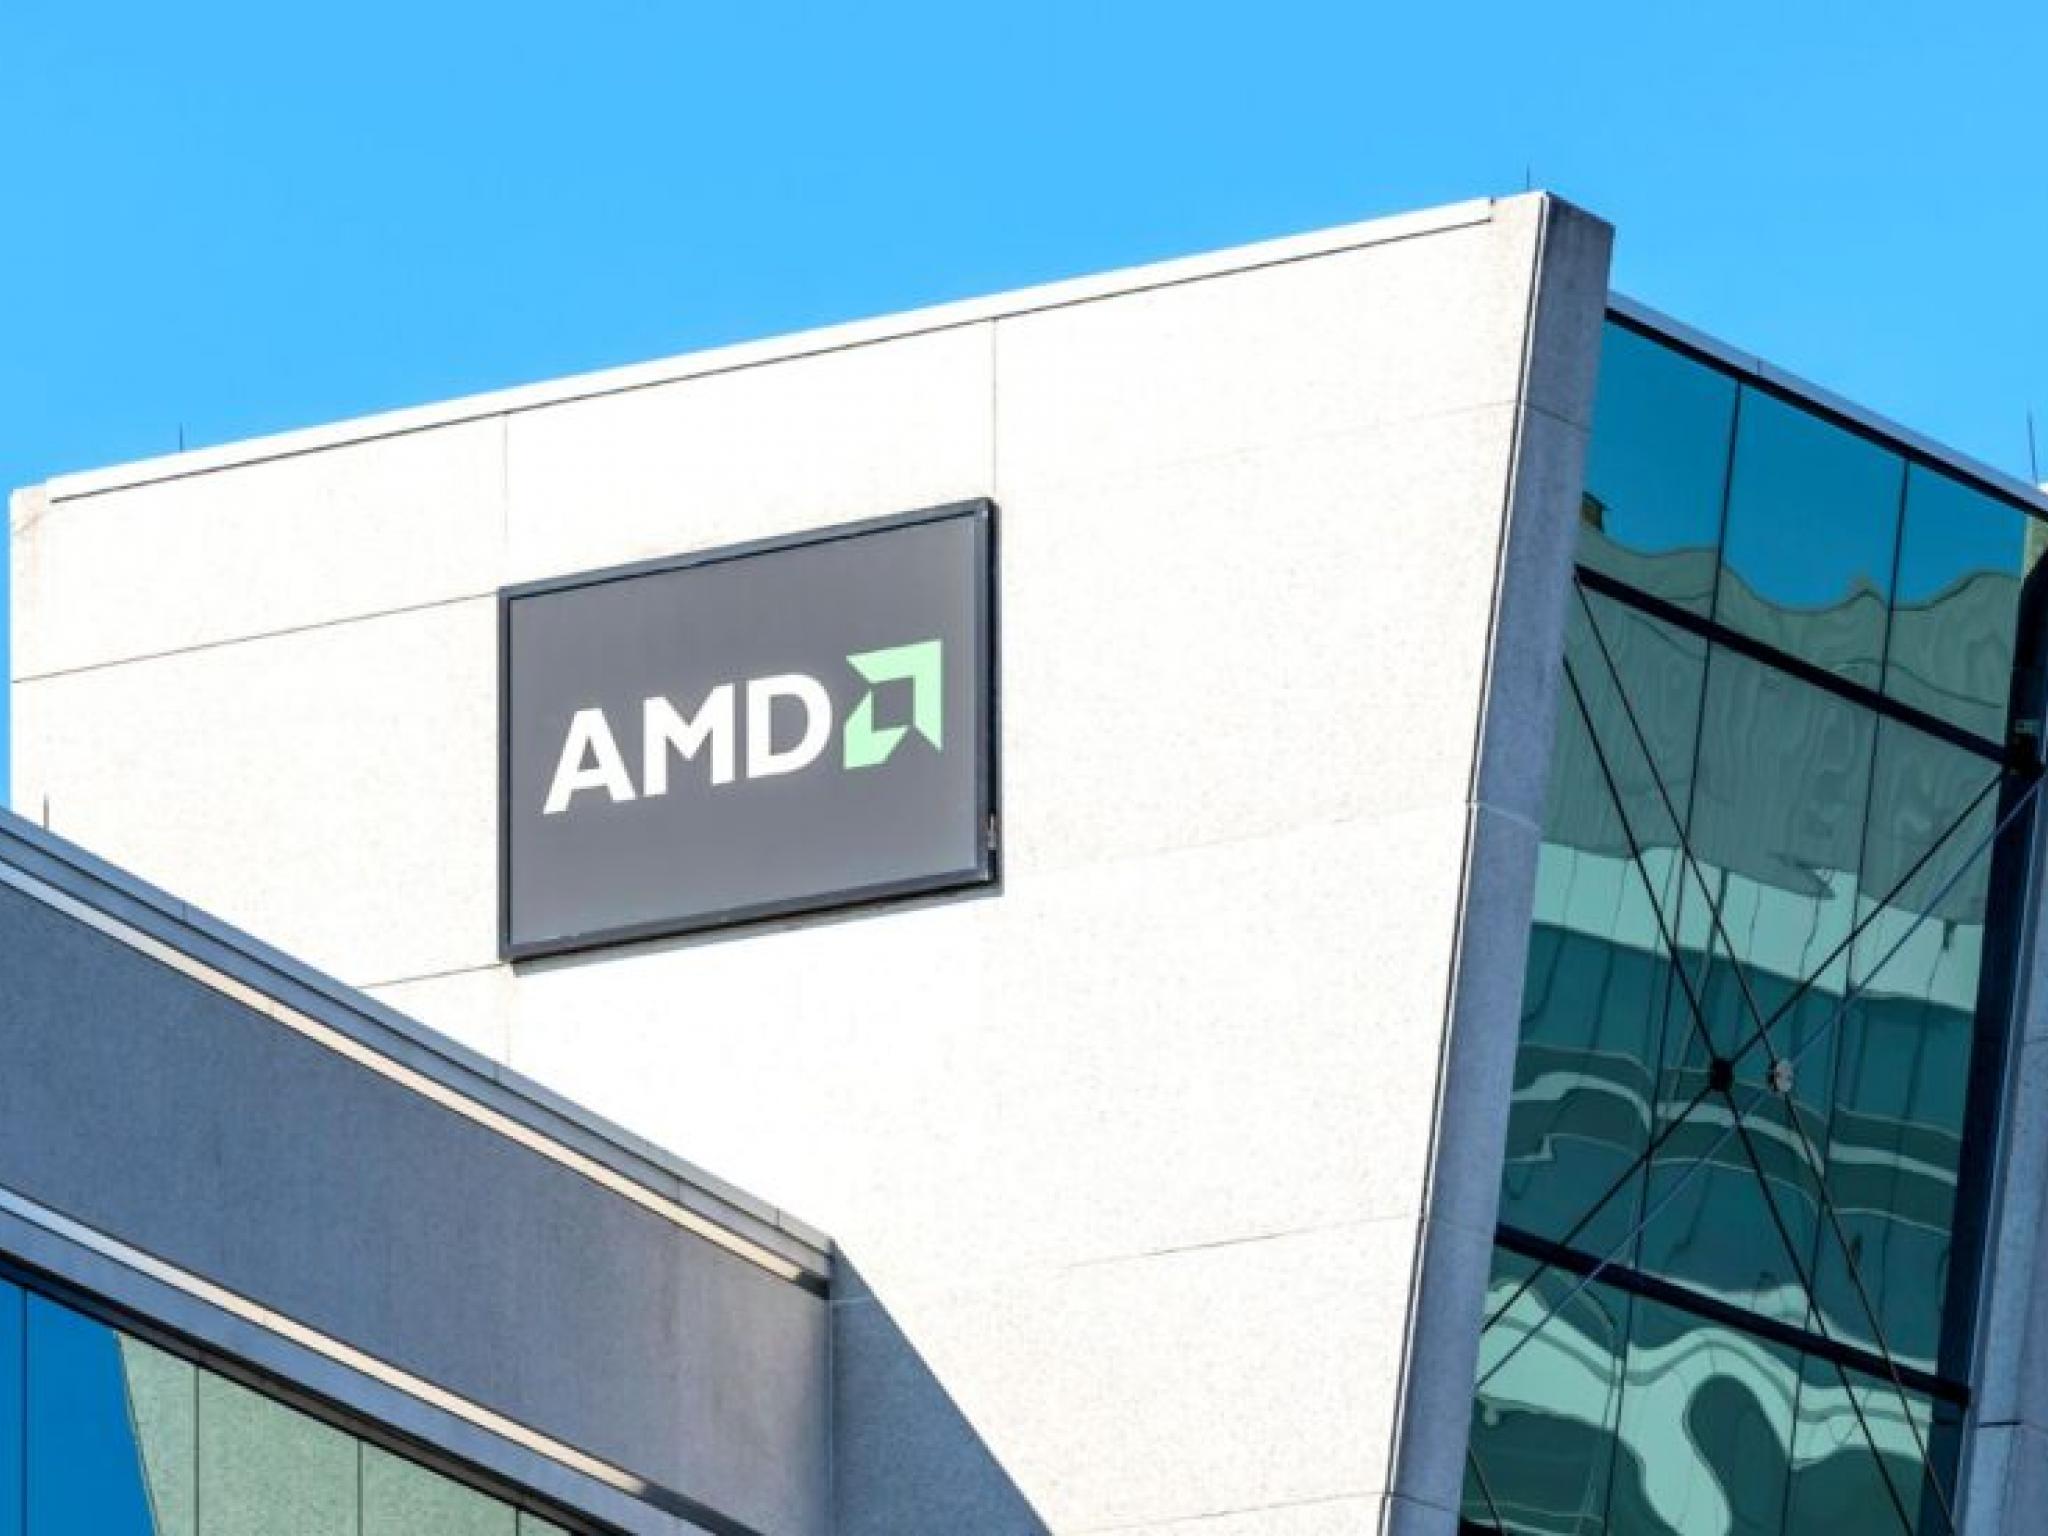  amds-mi300-chip-gains-momentum-analyst-predicts-strong-growth-and-server-market-success 